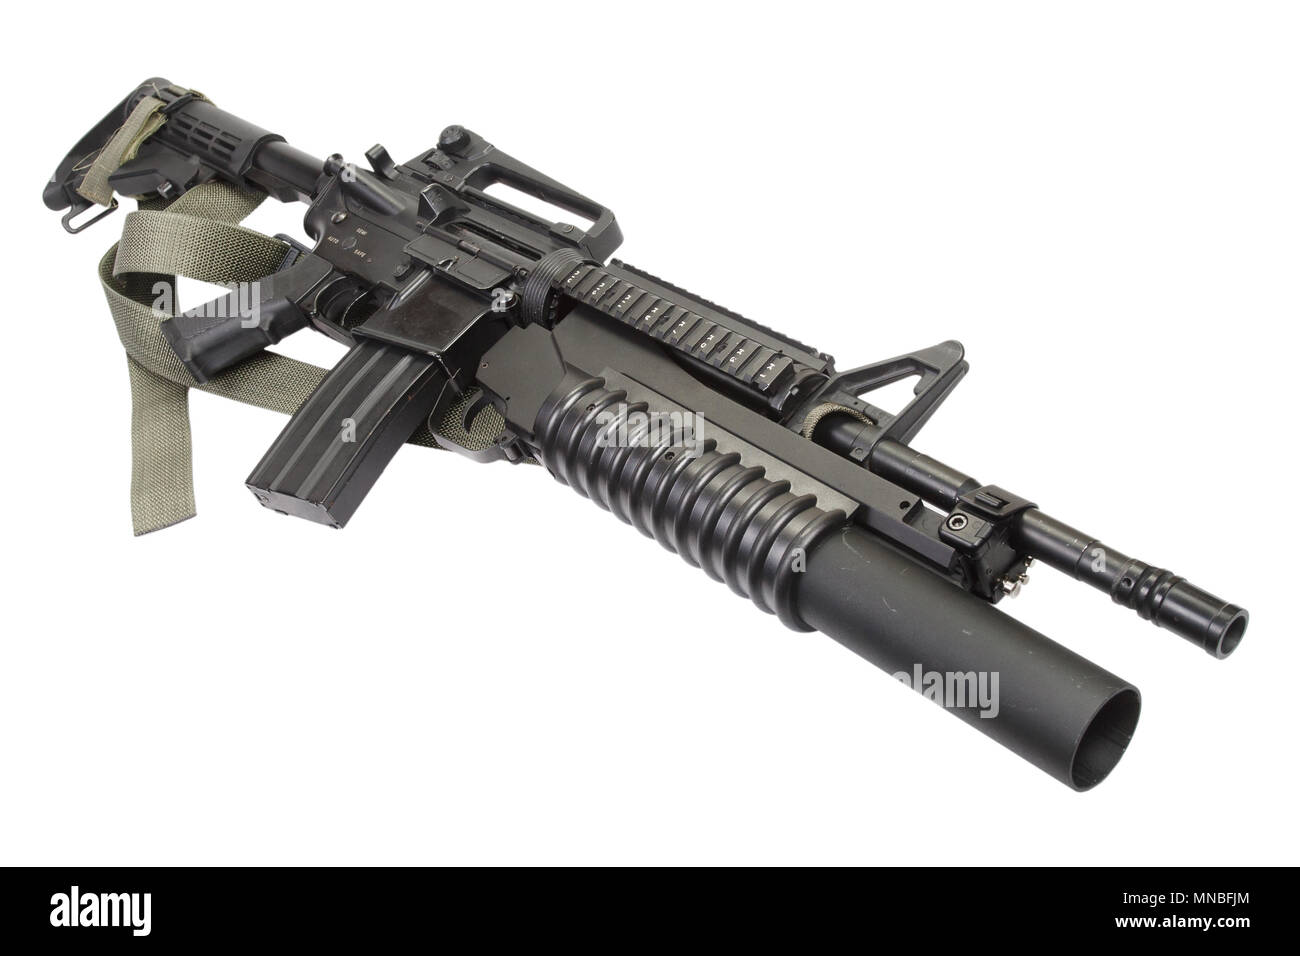 M4 carbine equipped with an M203 grenade launcher Stock Photo